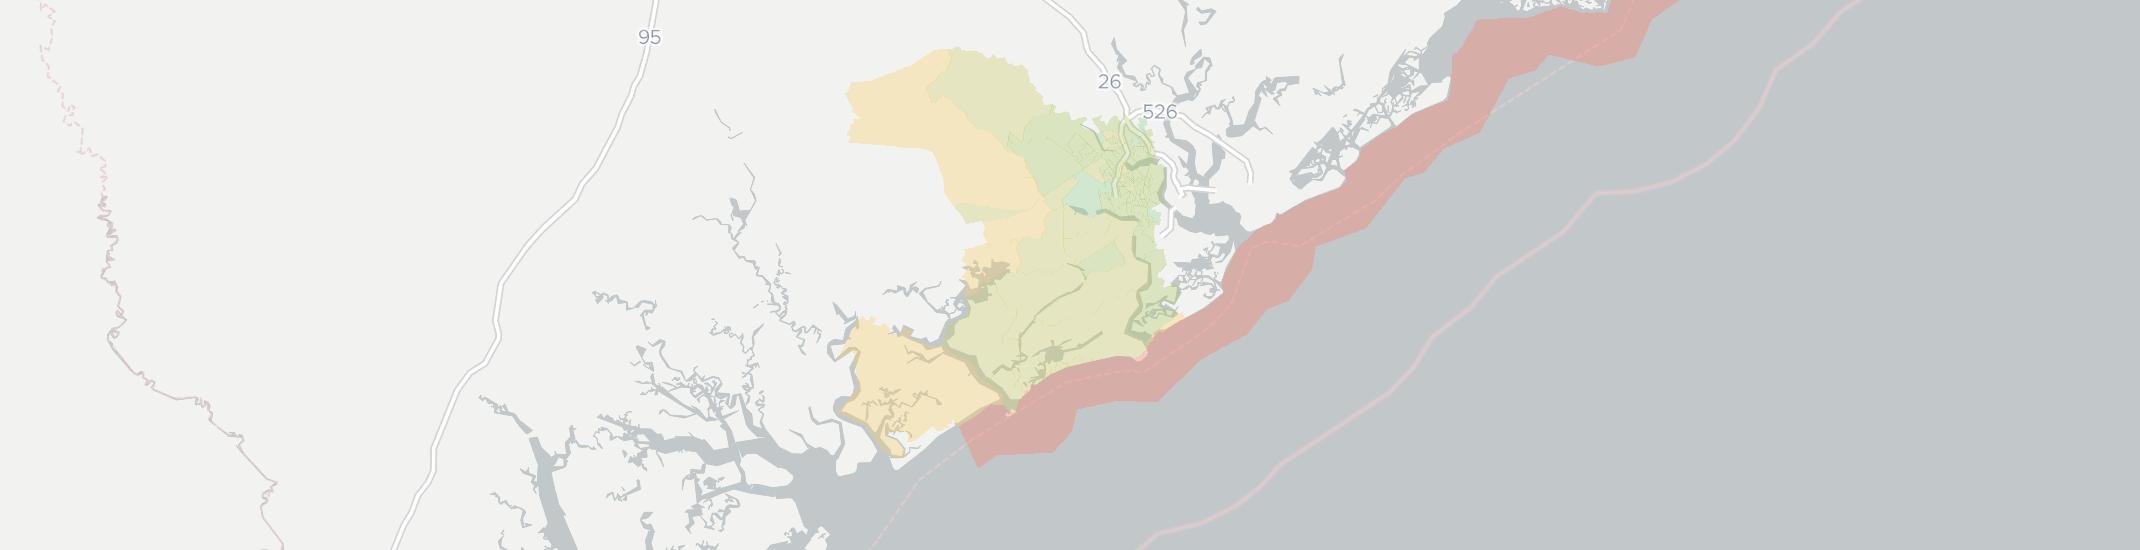 Johns Island Internet Competition Map. Click for interactive map.